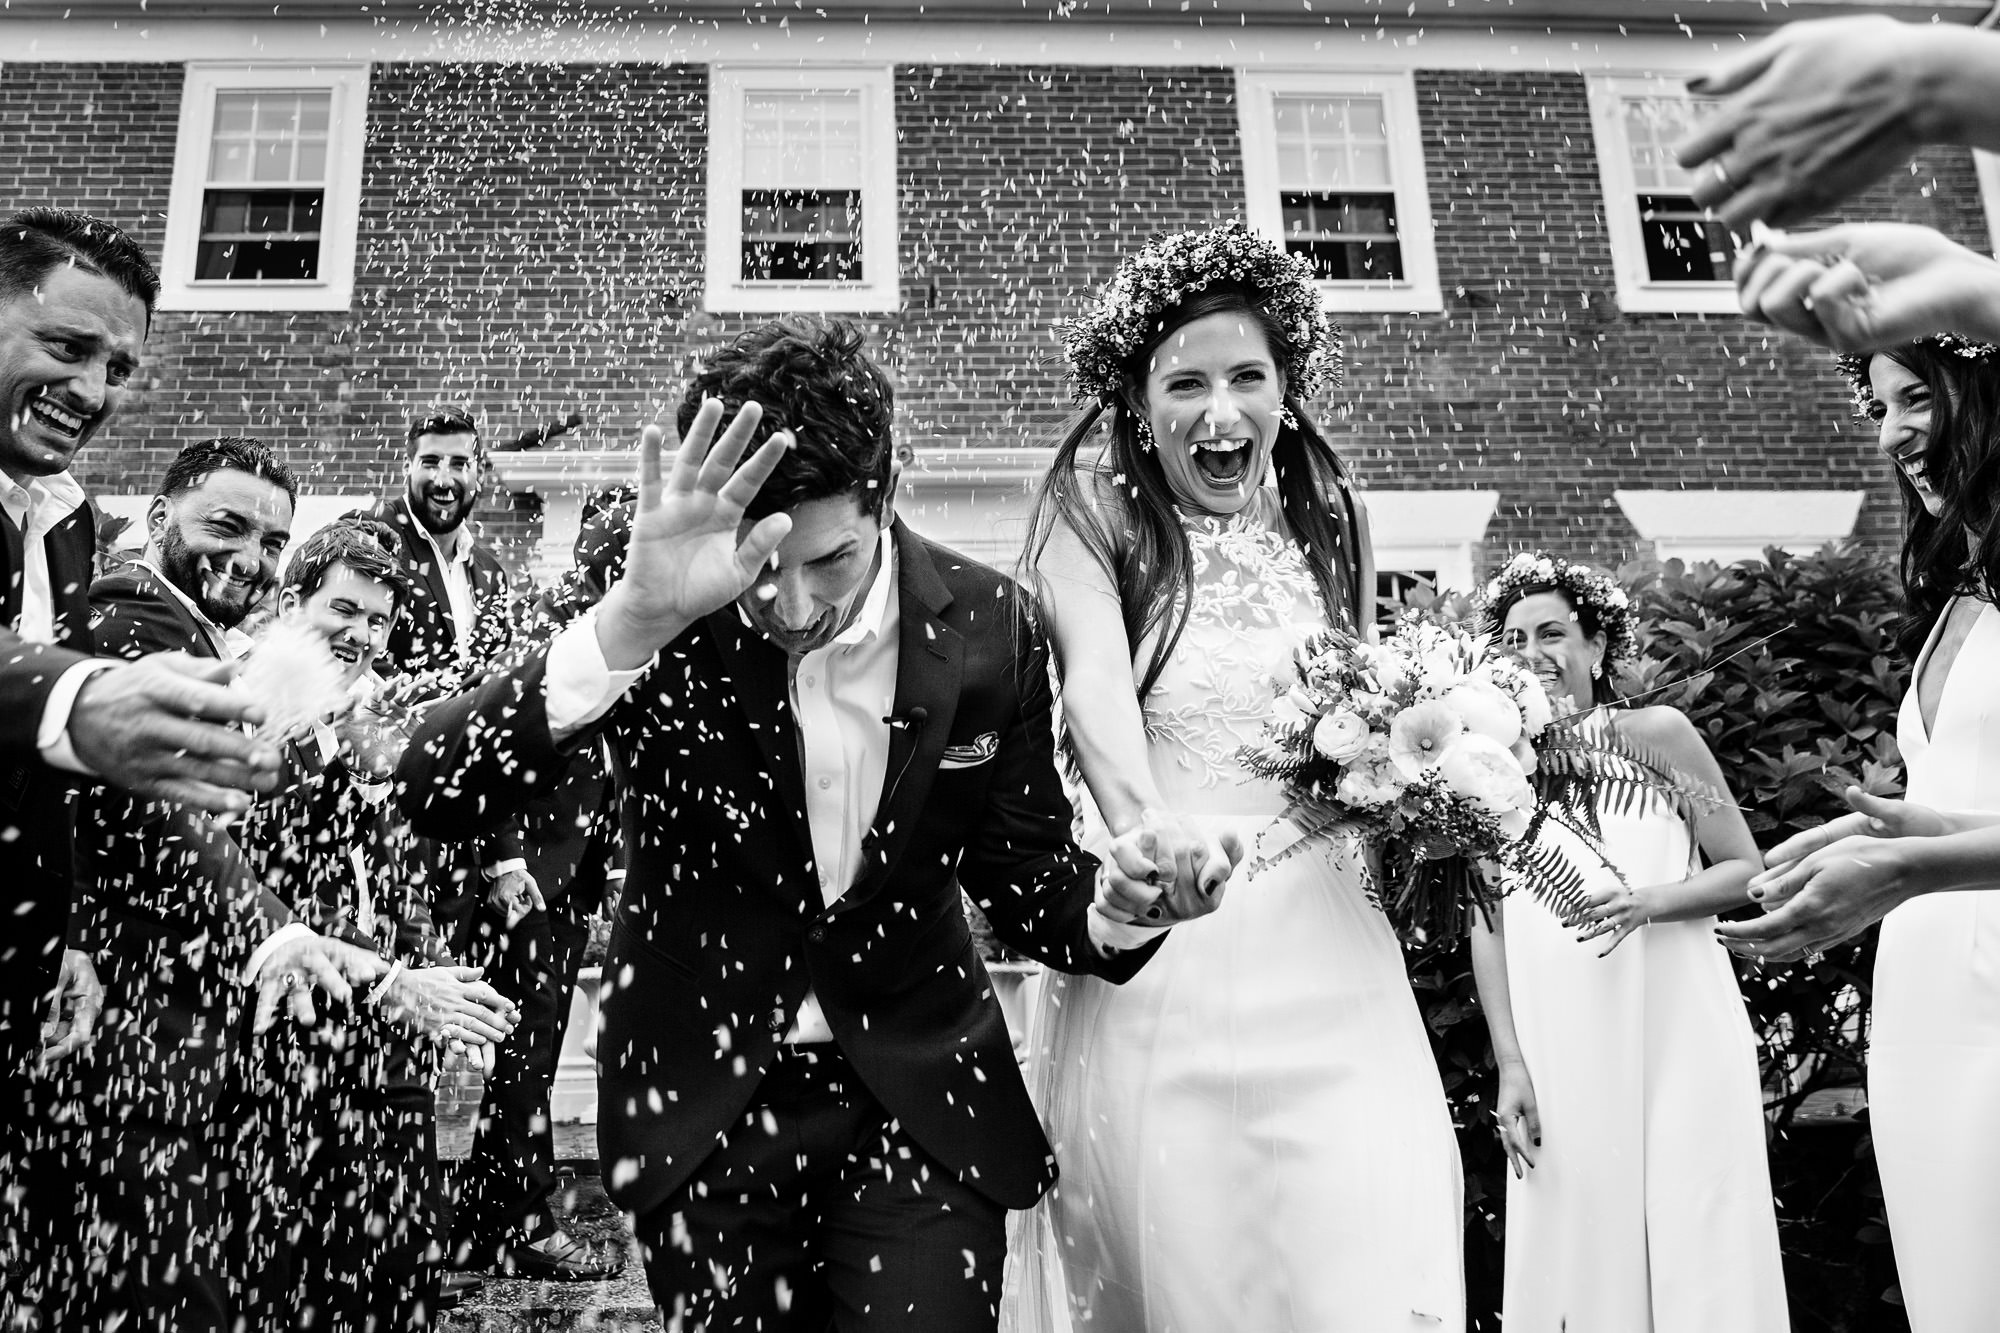 A bride and groom exits their wedding ceremony while rice is thrown at them.